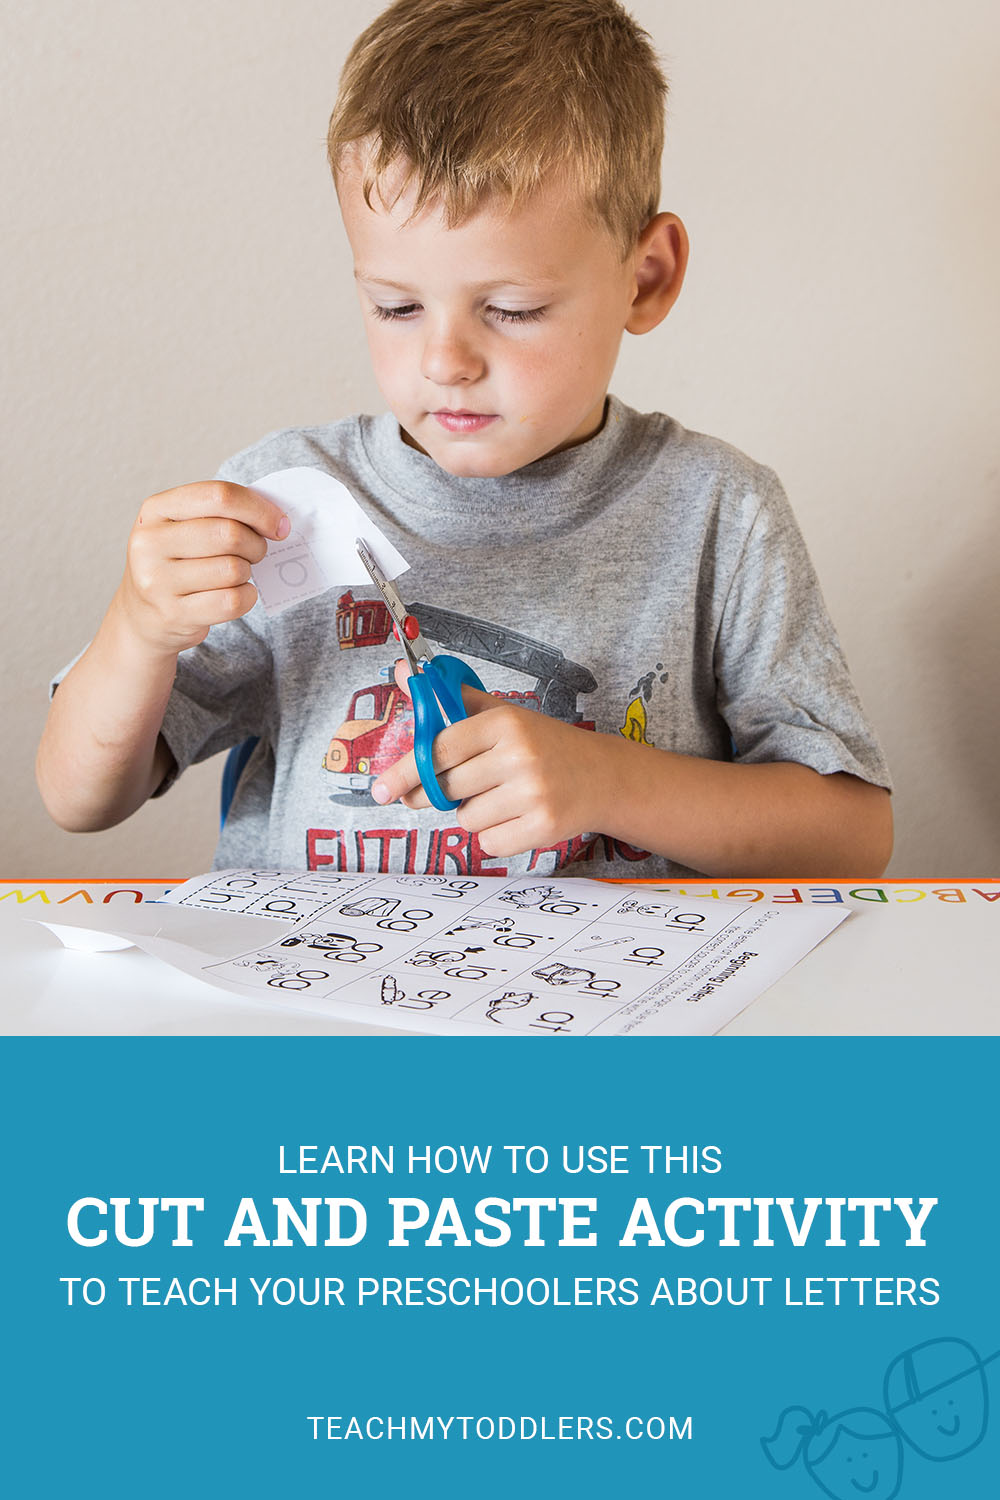 Learn how to use this cut and paste activity to teach preschoolers about letters